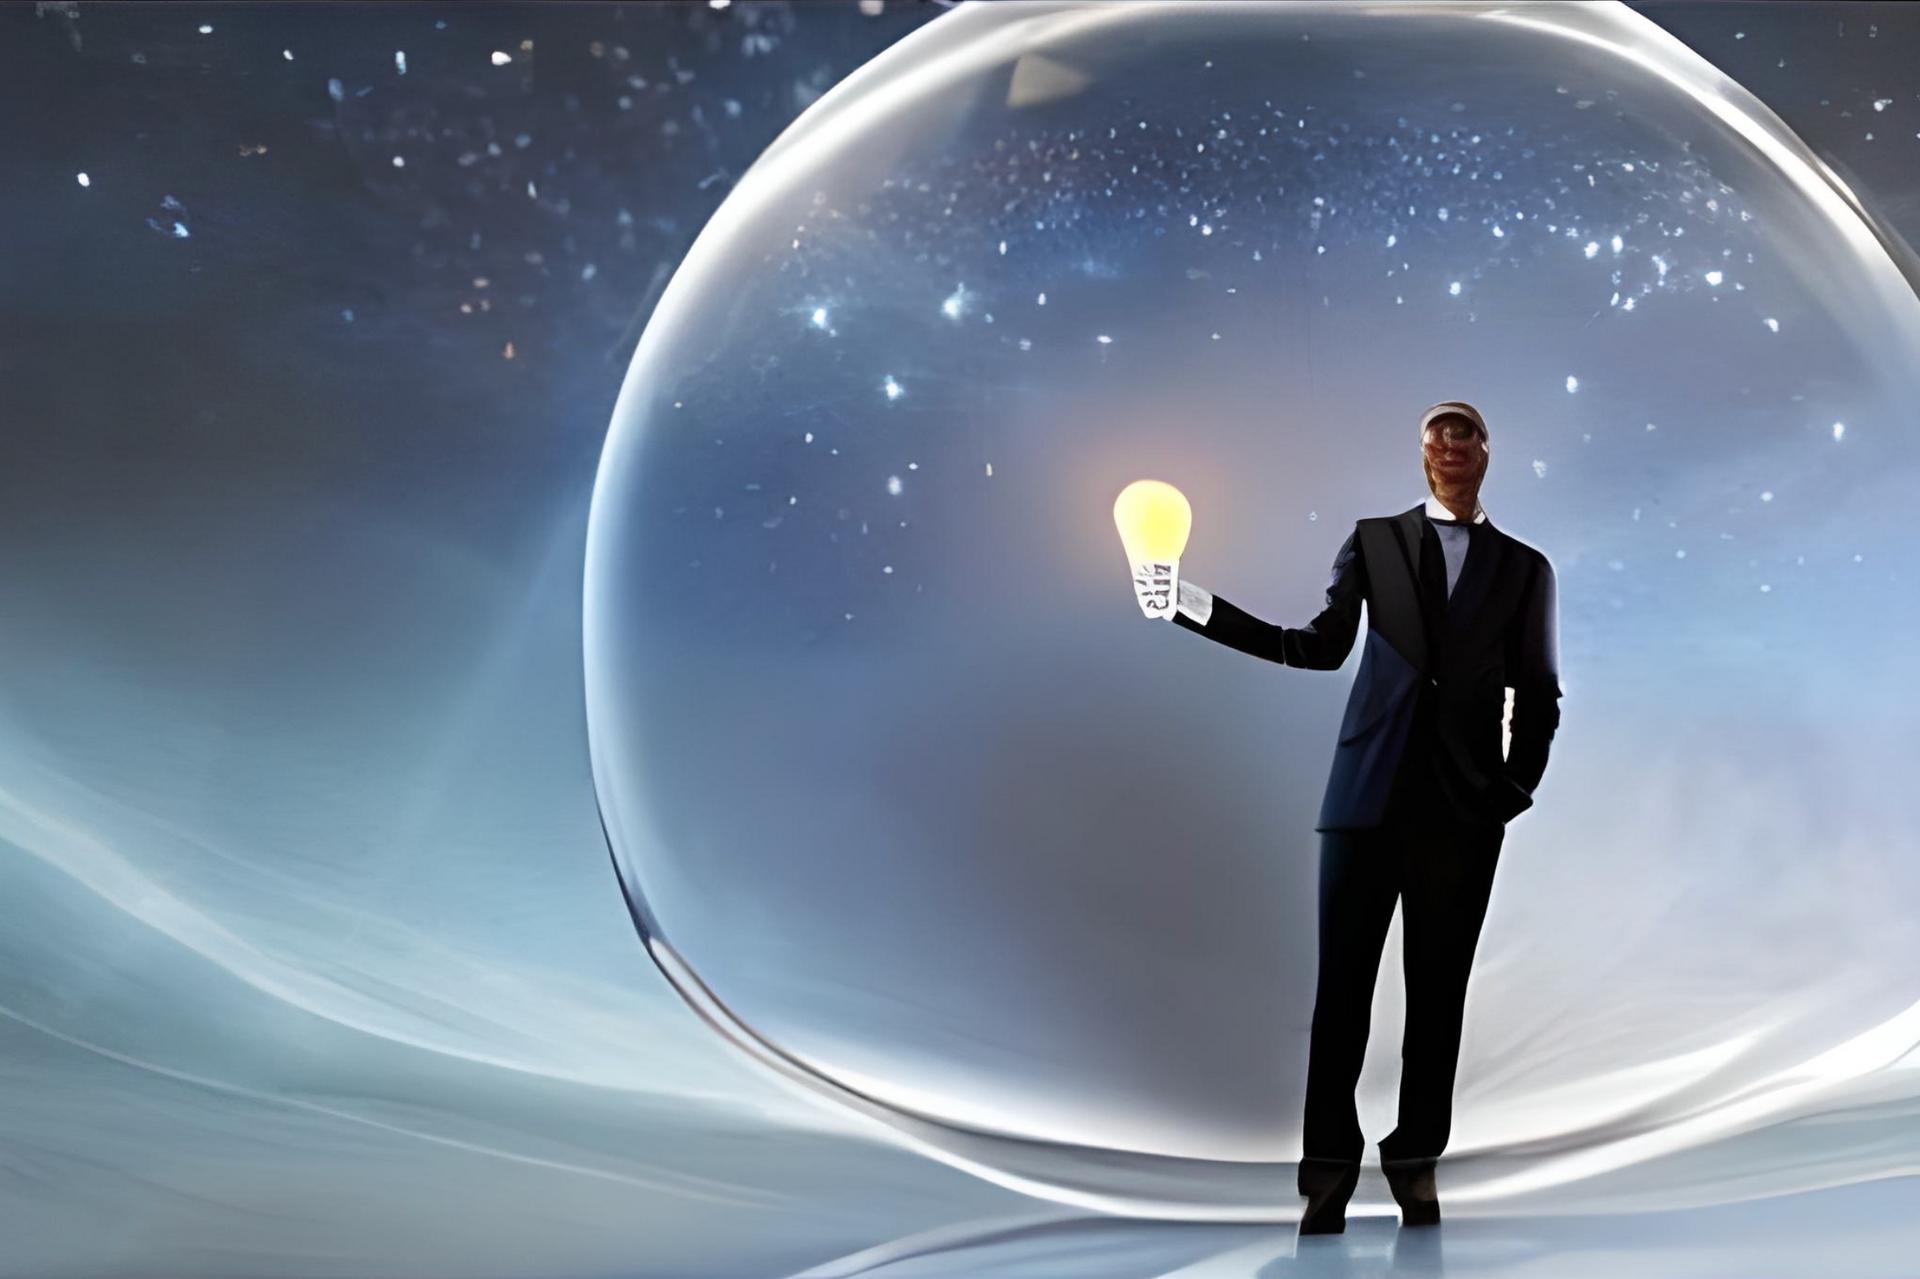 A man in a suit is holding a light bulb in his hand